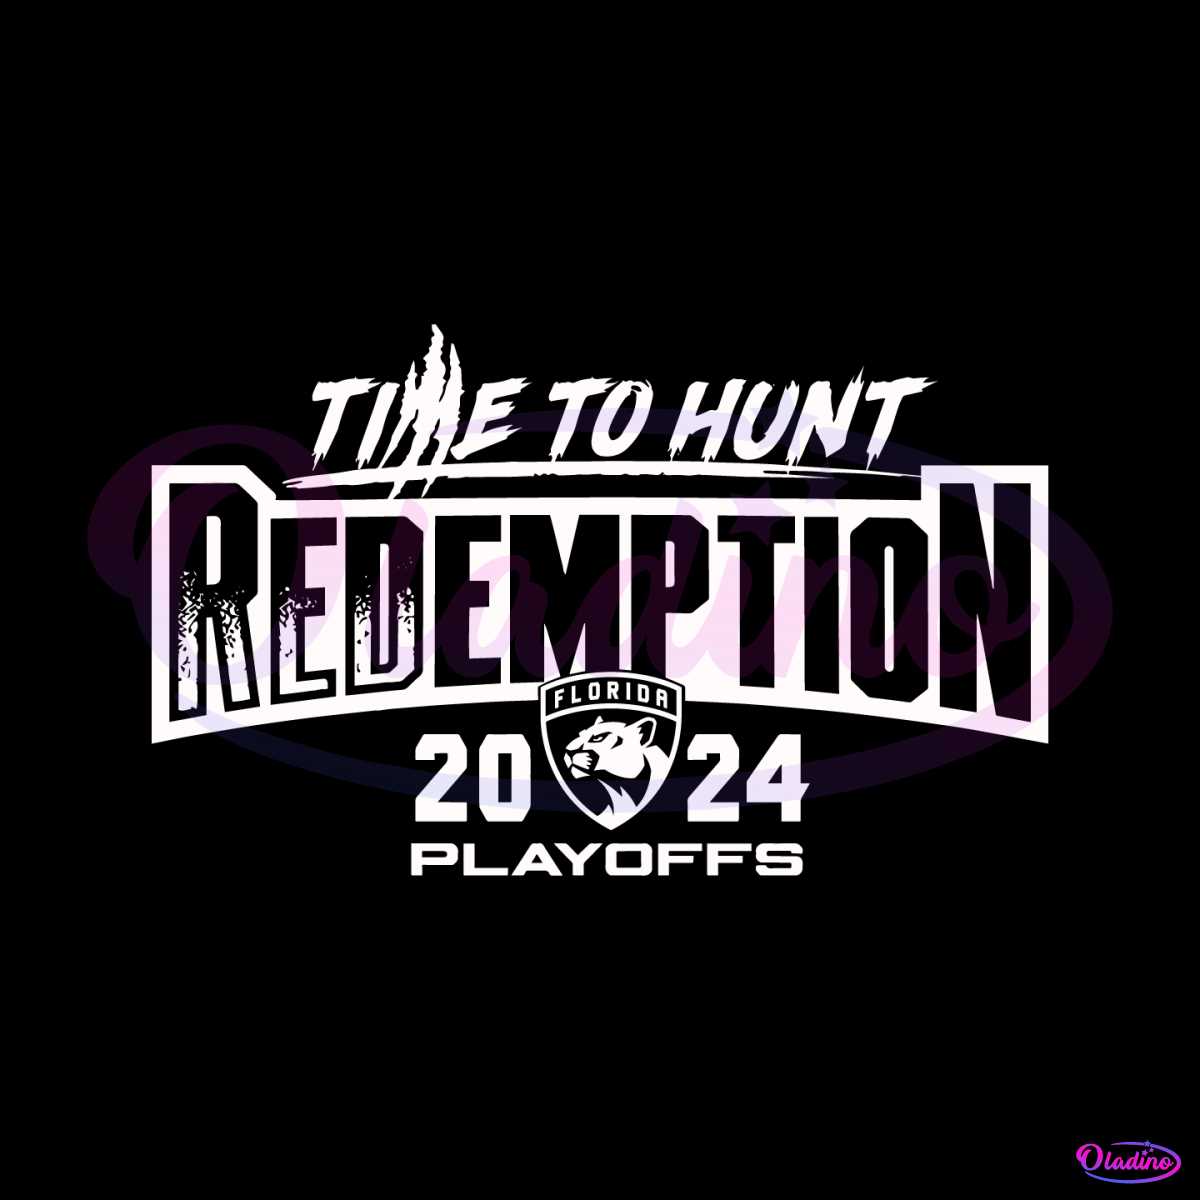 florida-panthers-time-to-hunt-redemption-2024-playoff-svg